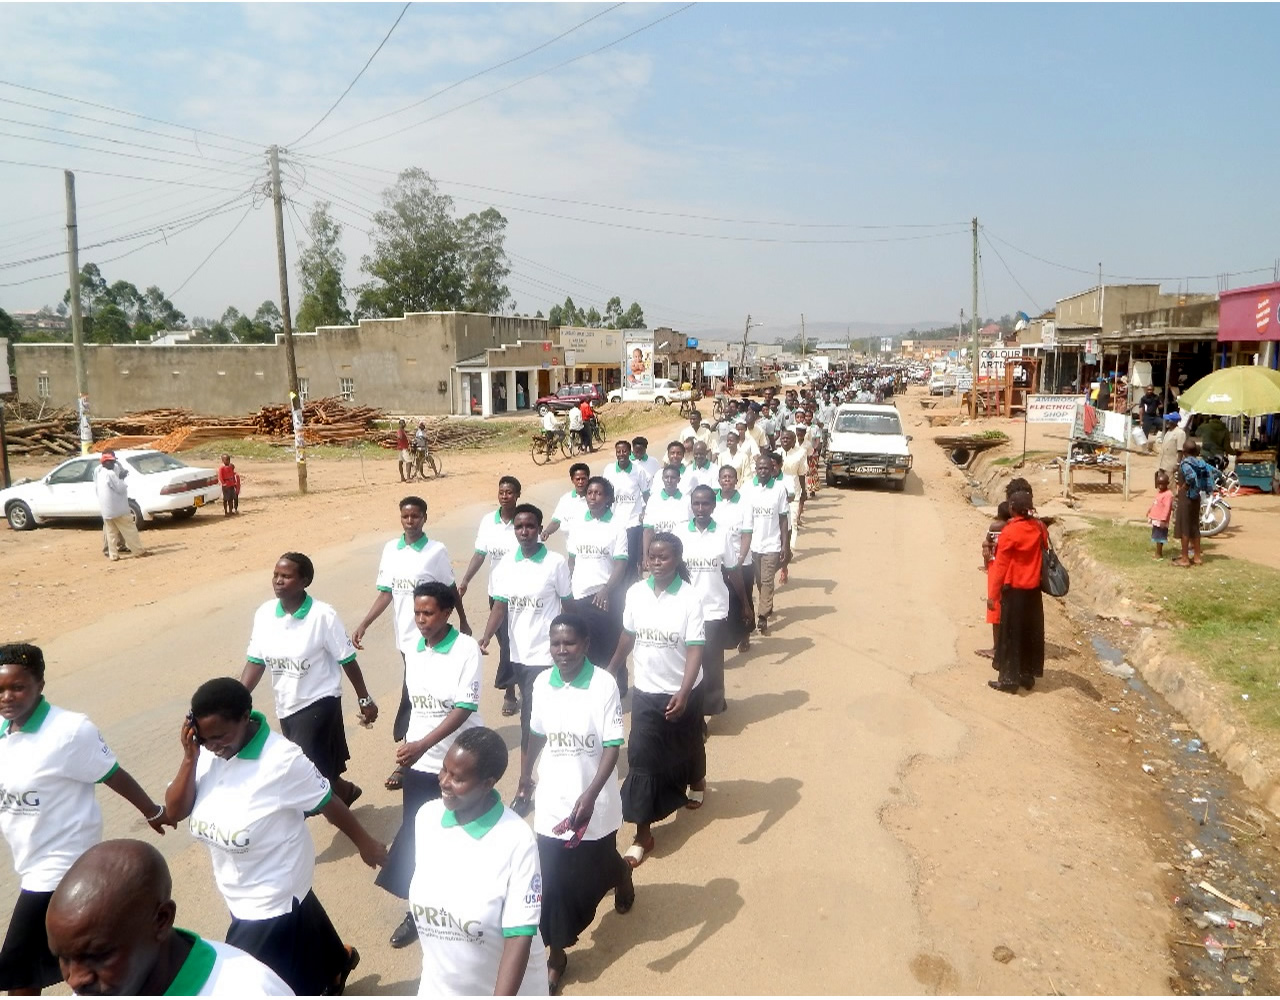 Participants march in the streets of Kisoro, Uganda during the 2015 breastfeeding commemoration day.